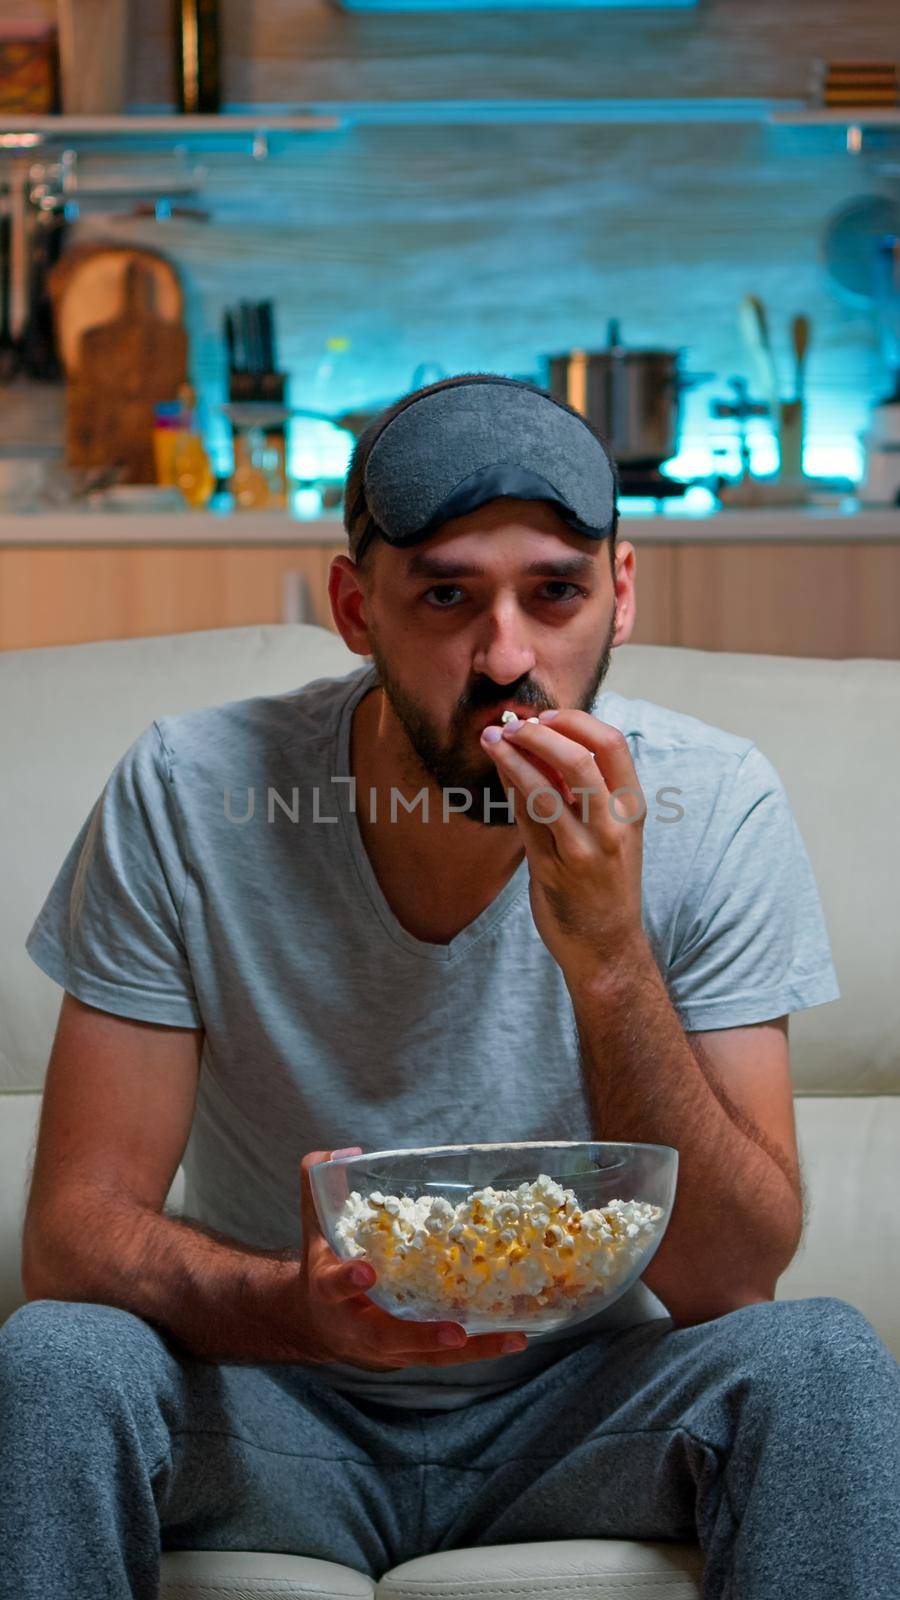 Concentrated man with sleep eye mask sitting in front of television watching lifestyle show. Caucasian male relaxing on couch holding popcorn bowl late at night in kitchen